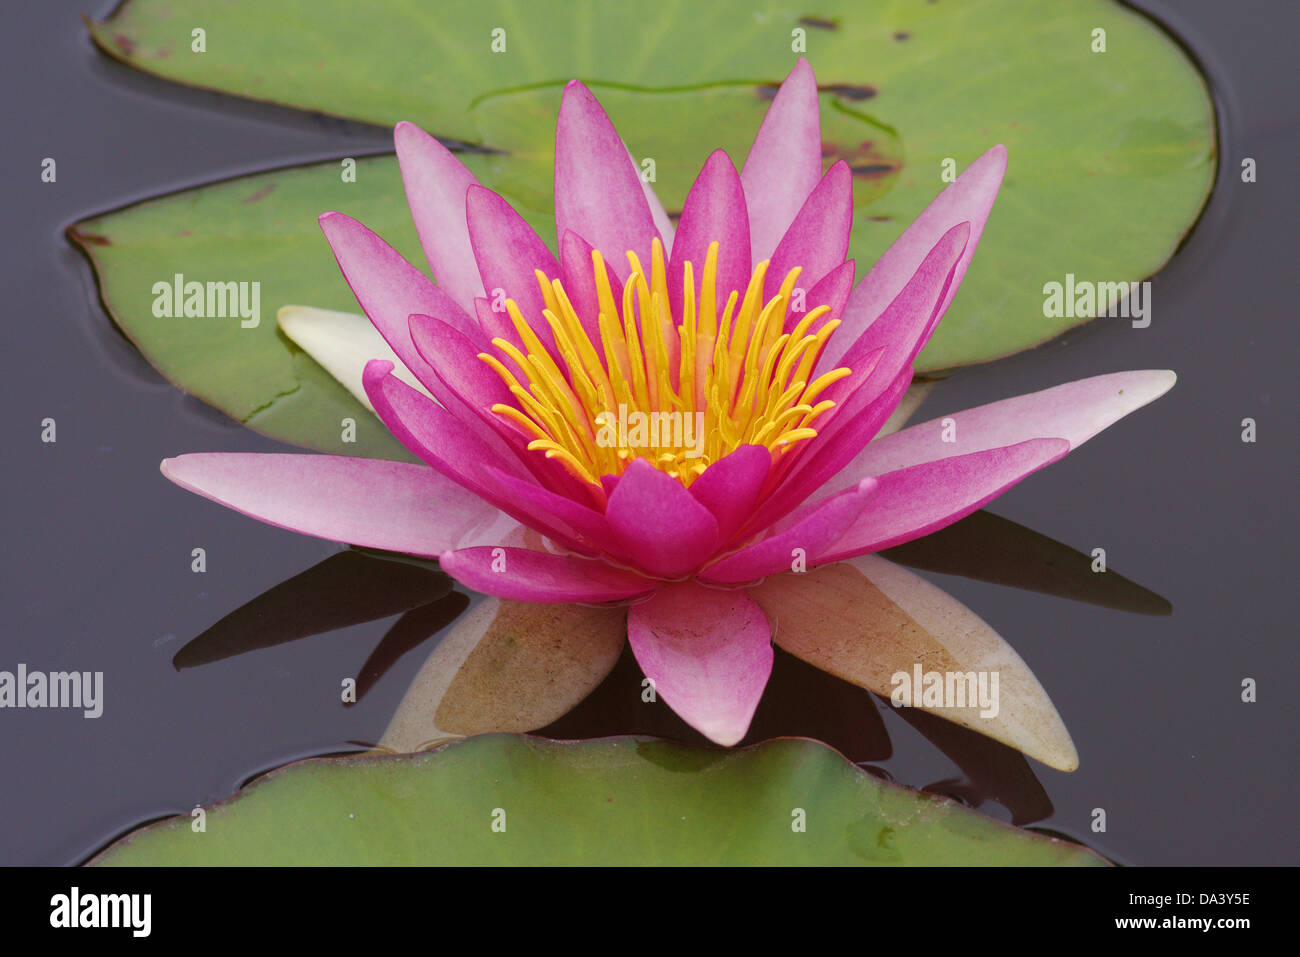 Pink water lily Nymphea fragile delicate beauty Stock Photo